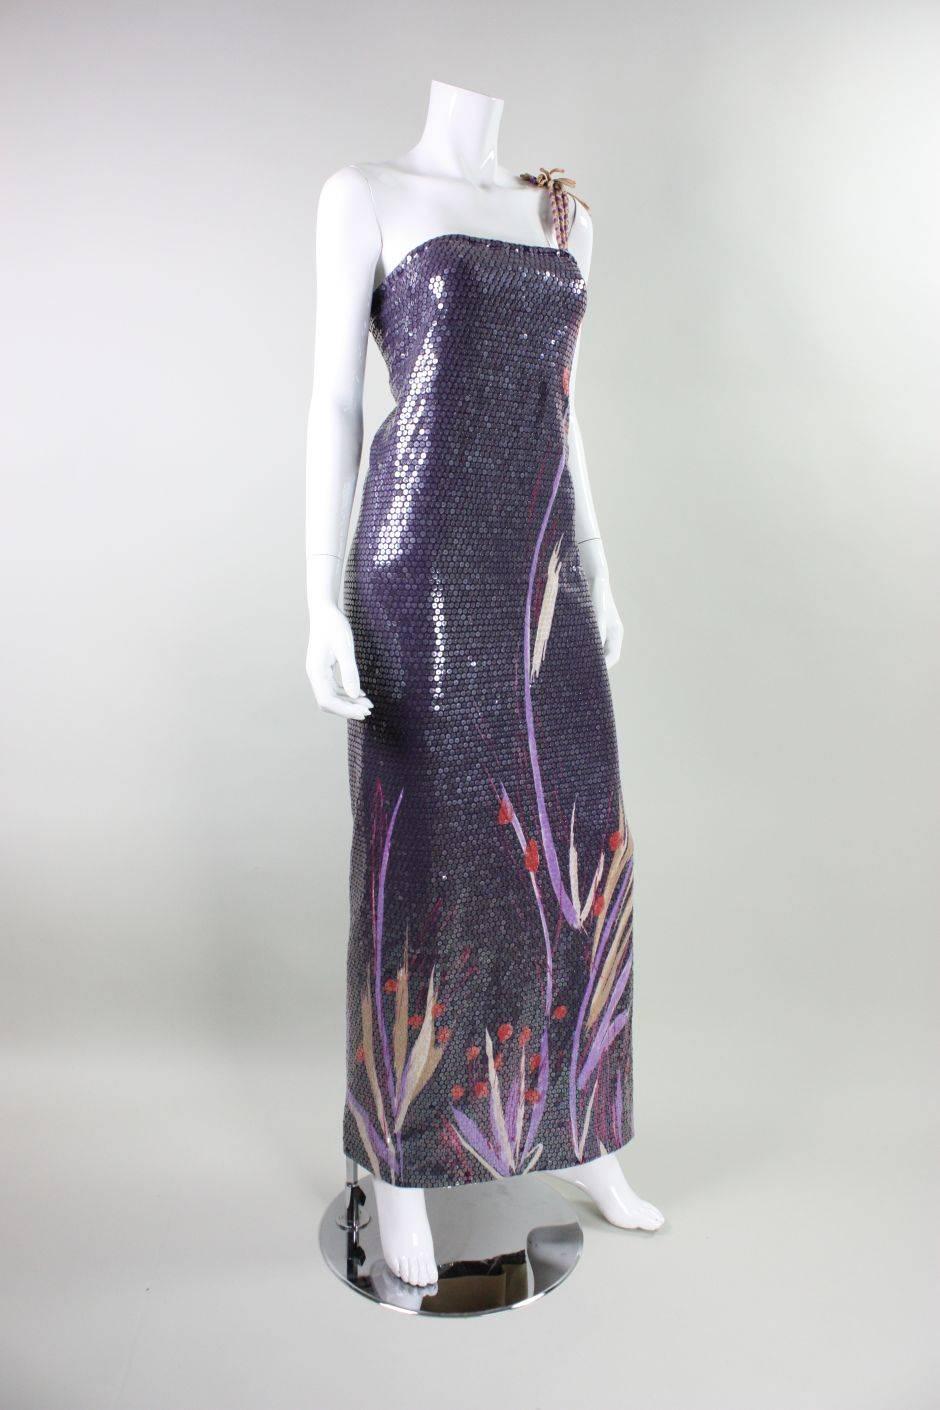 Vintage anonymous gown dates to the 1970's and is made of purple stretch fabric with a floral border print that comes up from hem. Three multicolored braided shoulder straps on left shoulder. Side back slit in skirt. Fully lined with a stretchy nude